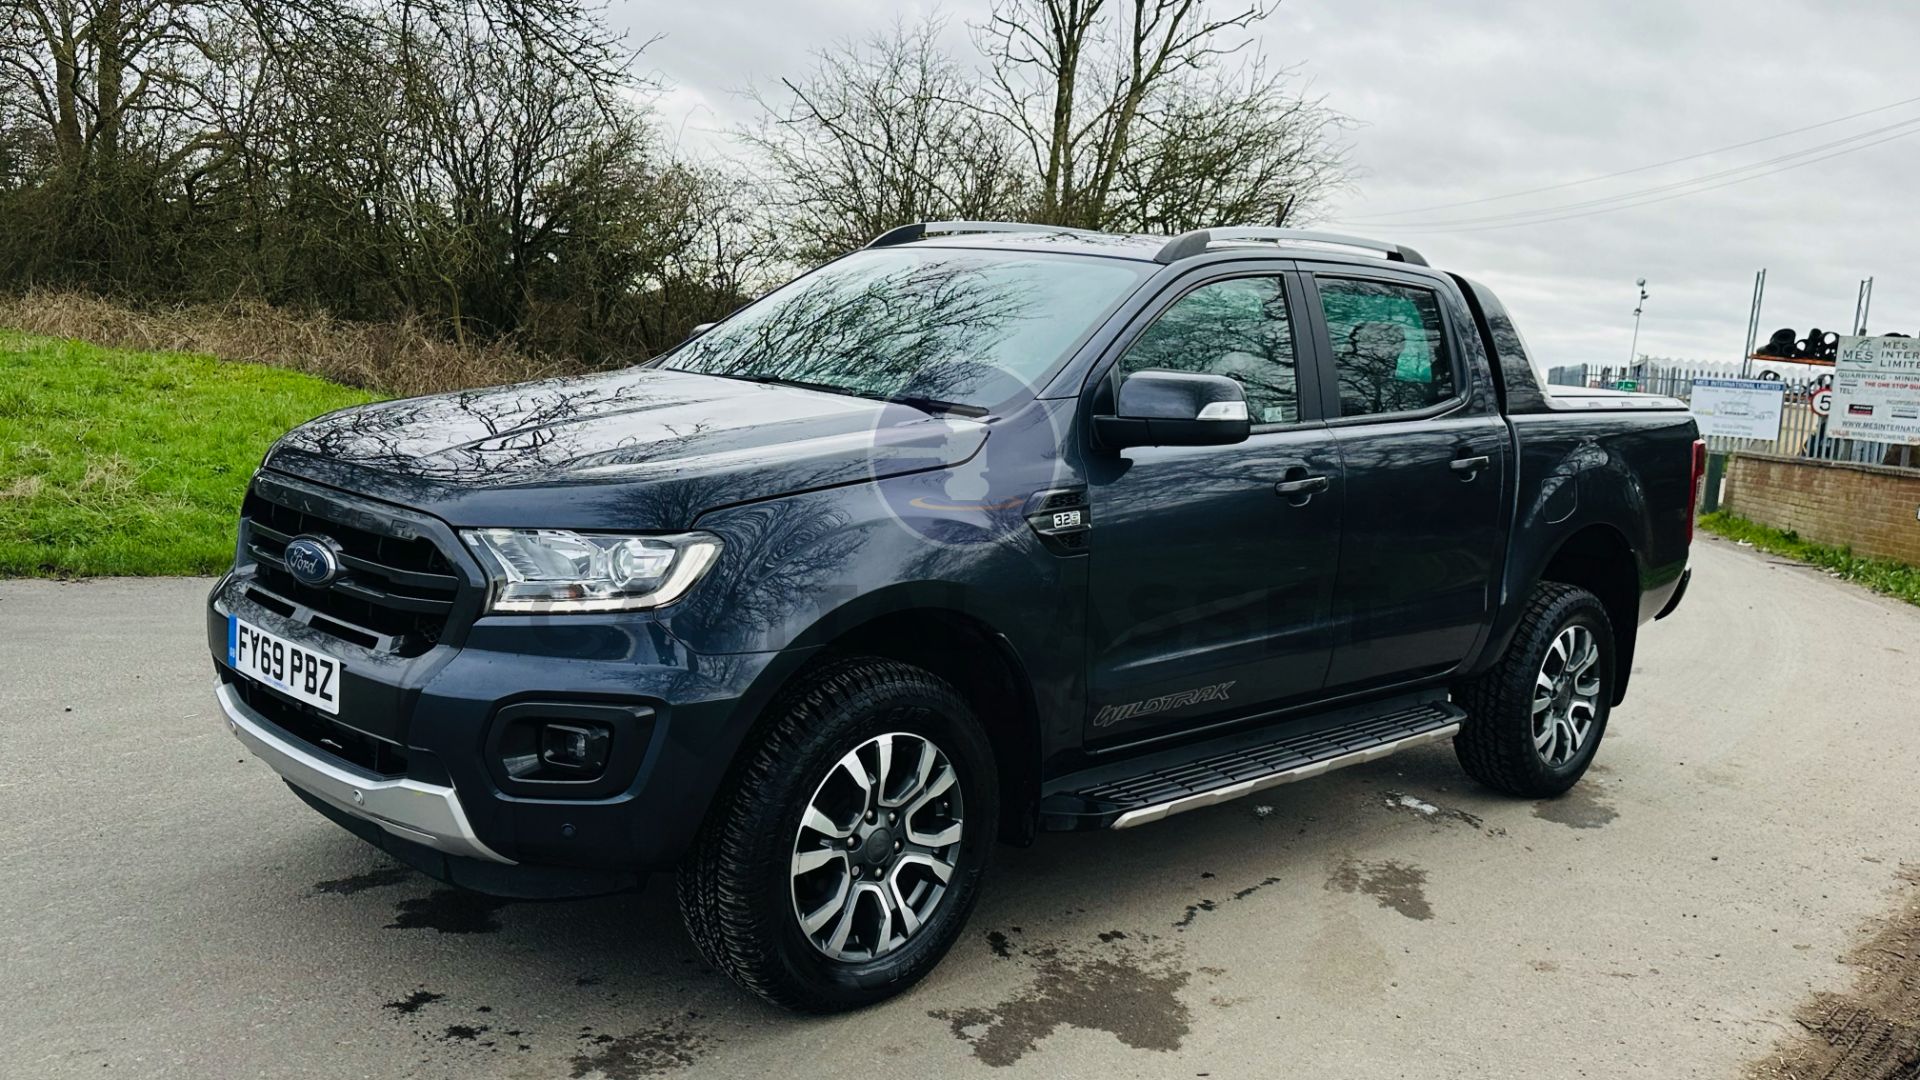 (On Sale) FORD RANGER *WILDTRAK EDITION* DOUBLE CAB PICK-UP (69 REG - EURO 6) 3.2 TDCI - AUTOMATIC - Image 6 of 49